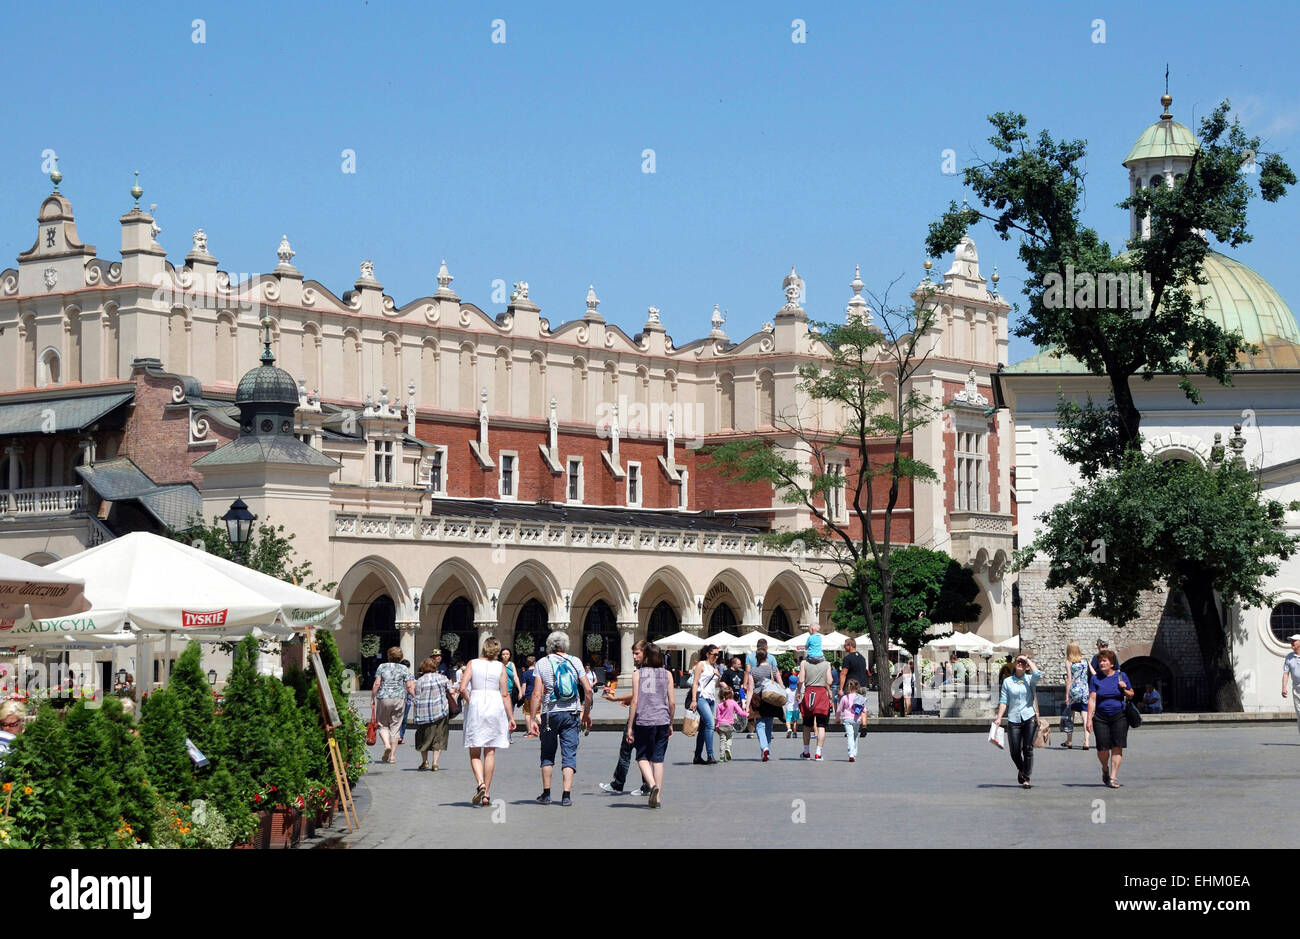 Main Square of Krakow in Poland with the Cloth Halls. Stock Photo